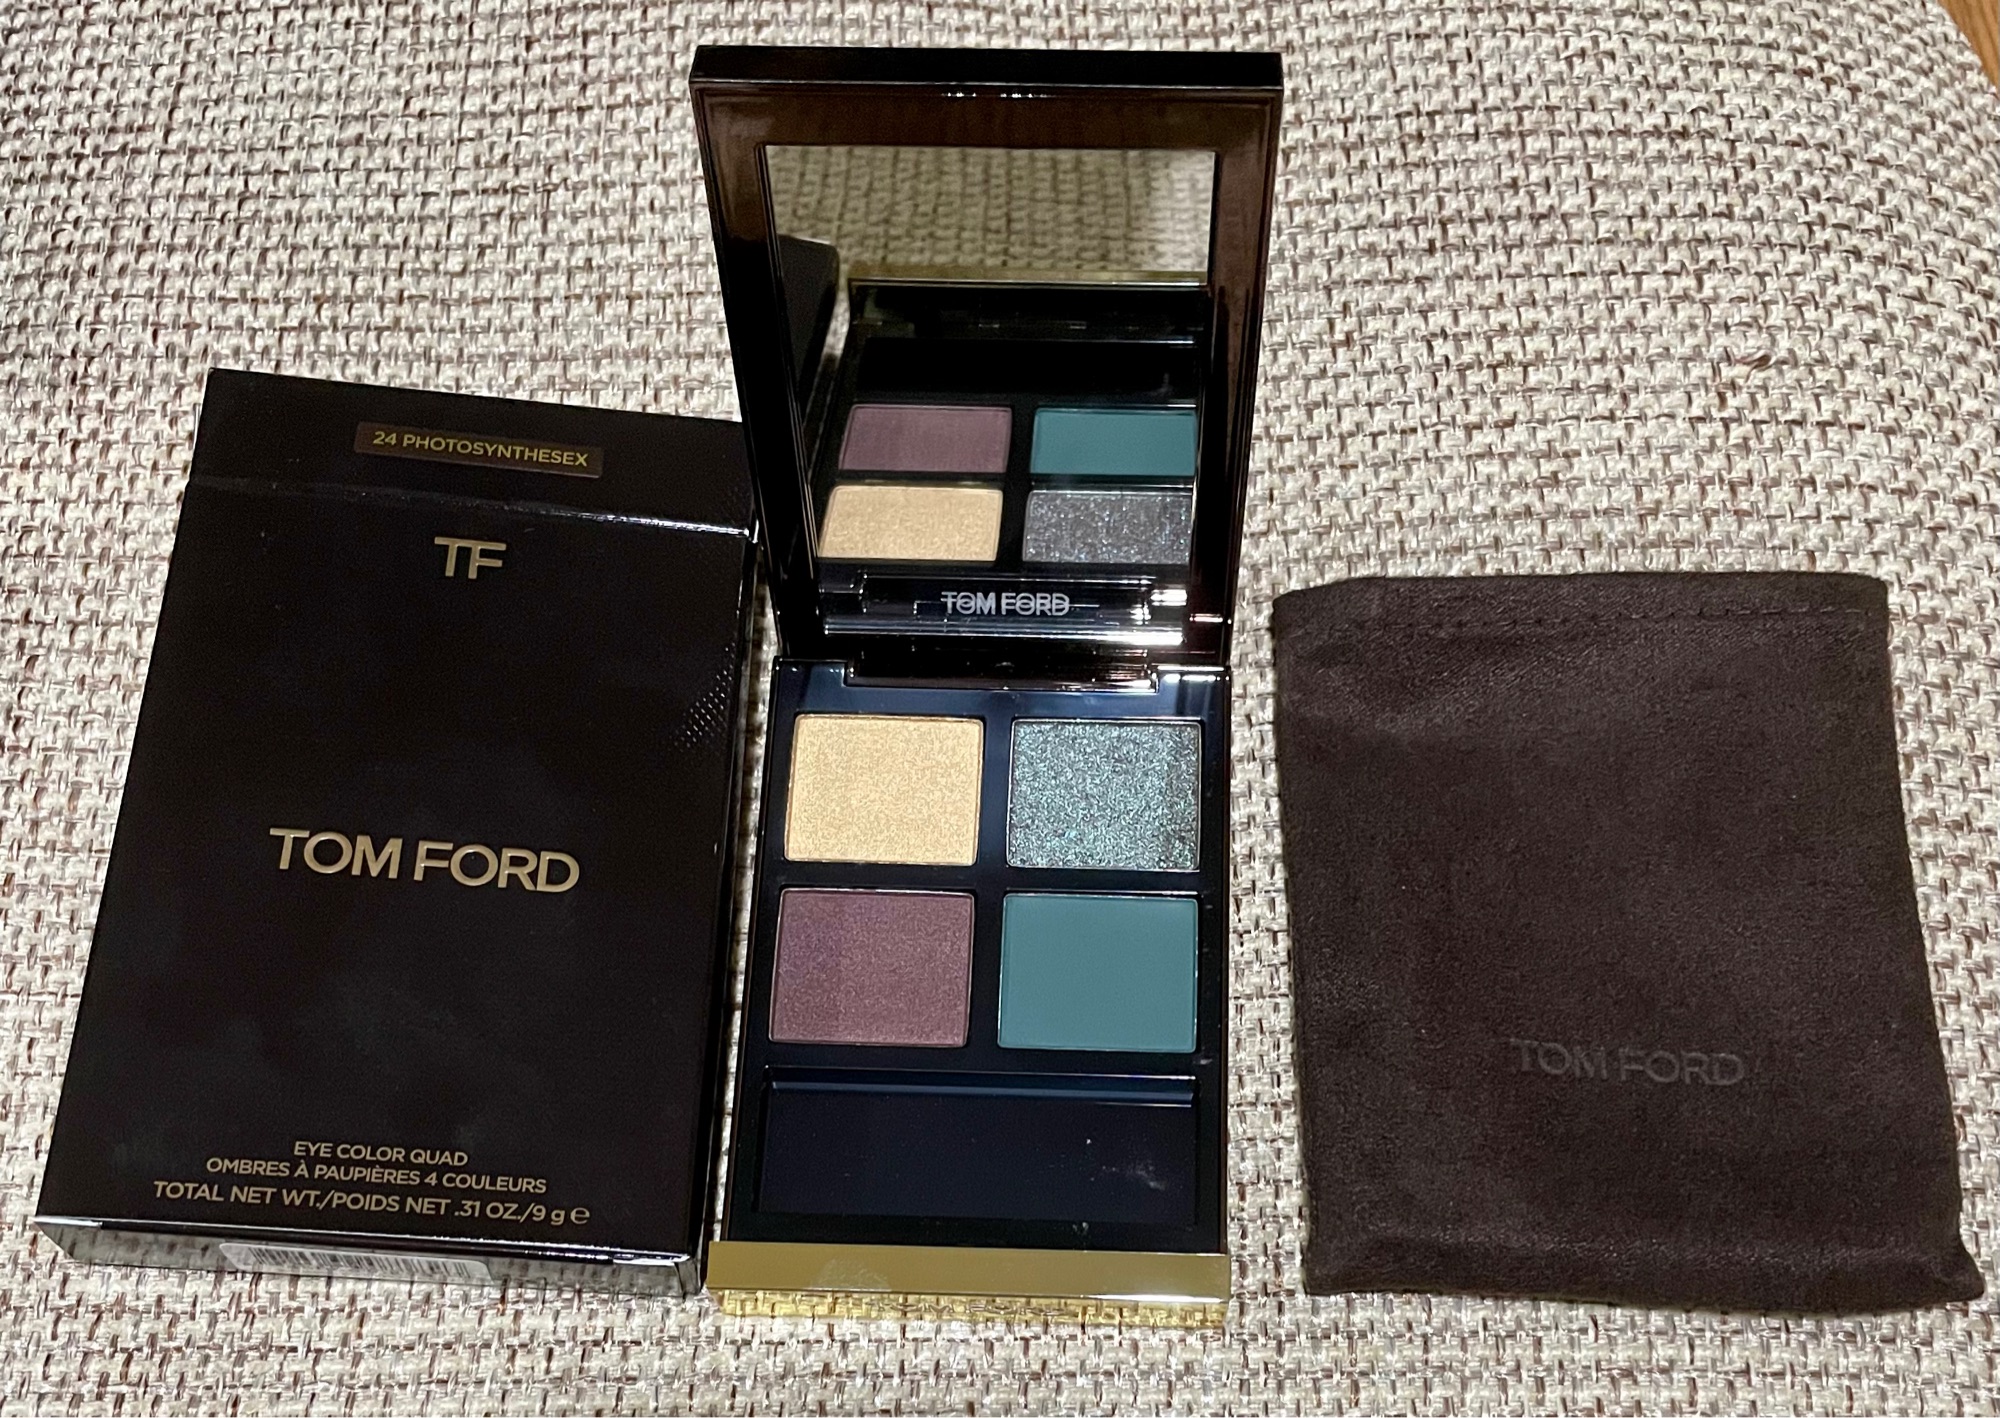 TOM FORD - PHOTOSYNTHESEX eyeshadow quad. Made in Italy. | Lazada PH